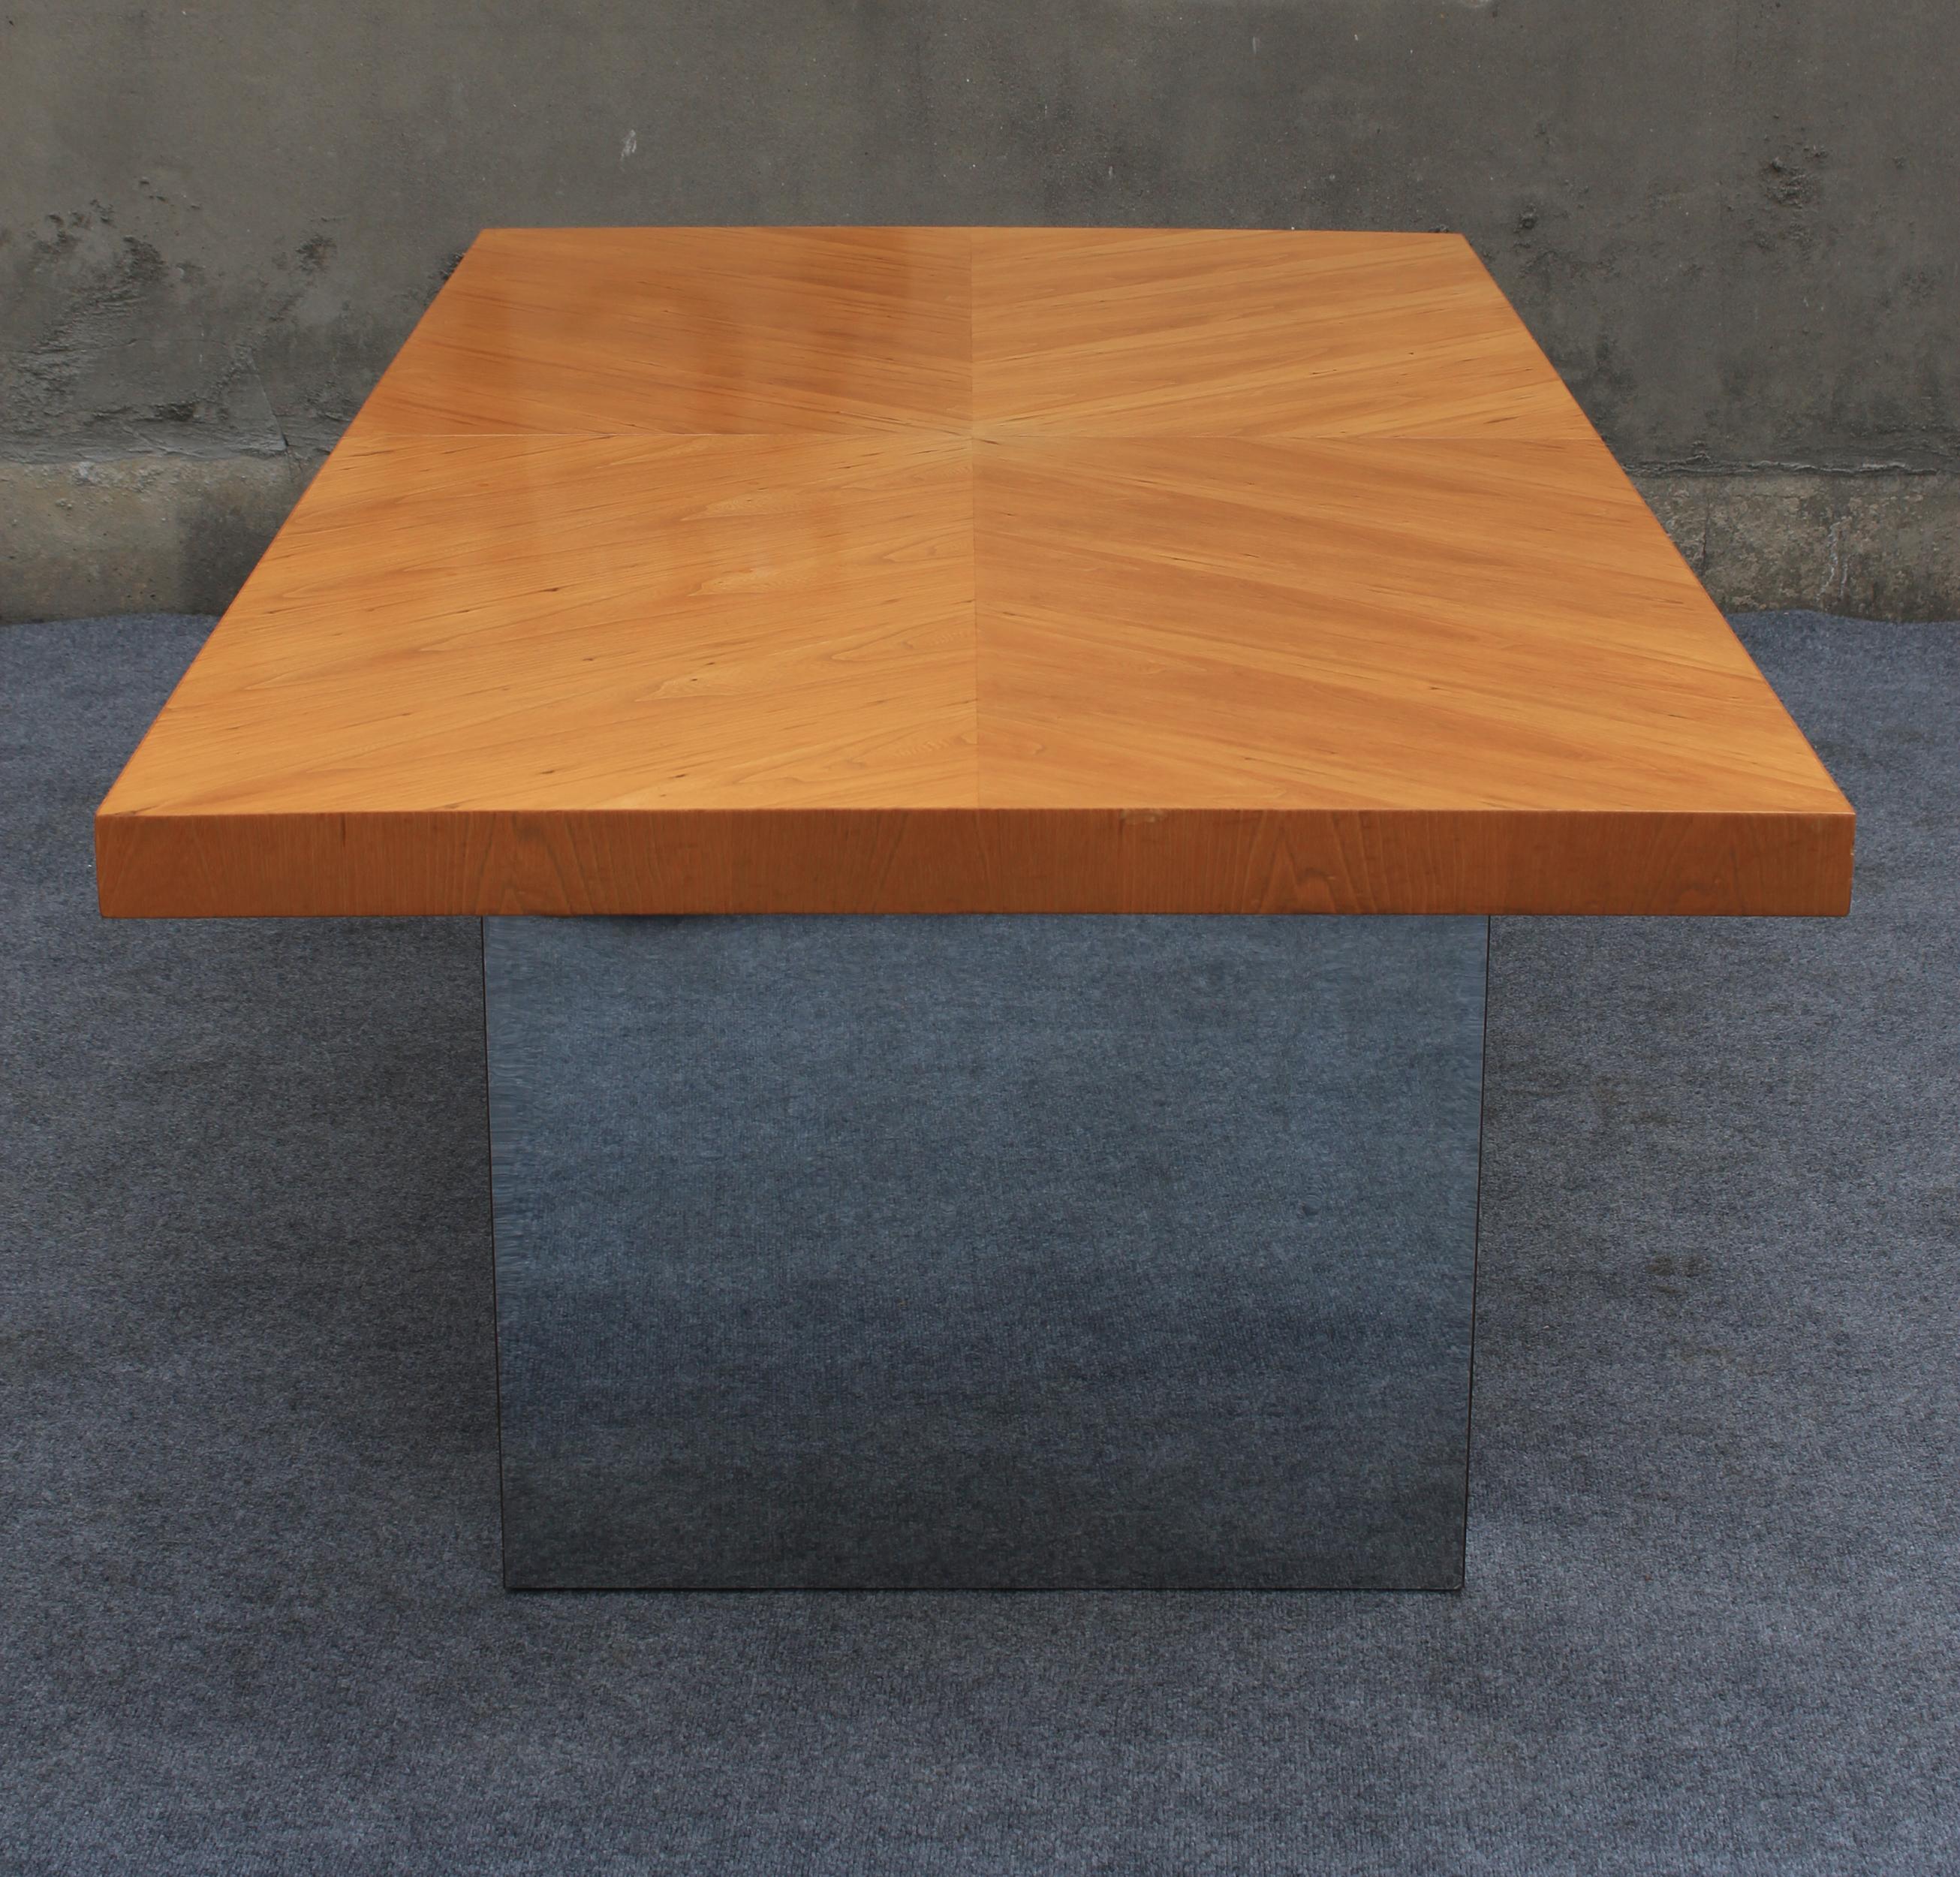 Designed in the late 1960s by Milo Baughman, this table was made by Thayer Coggin. Since then, this design has been copied and thousands of contemporary versions have been produced. This is thanks to the widespread fame of Baughman and others like